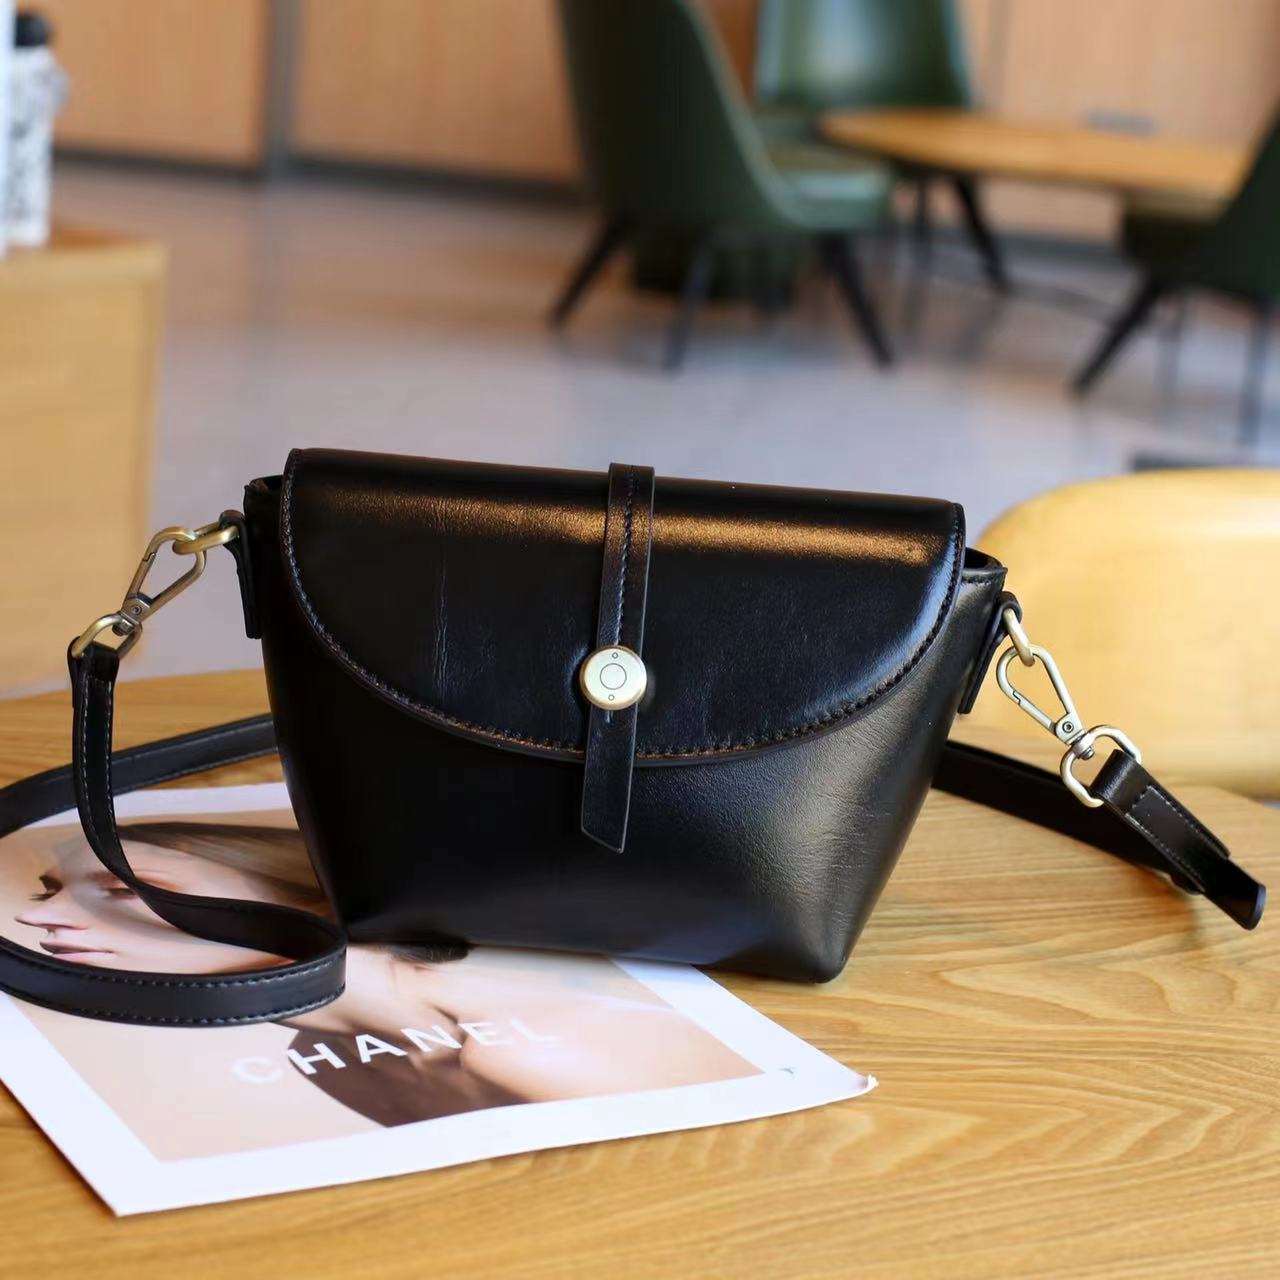 Refined Women's Small Shoulder Bag in Authentic Leather woyaza